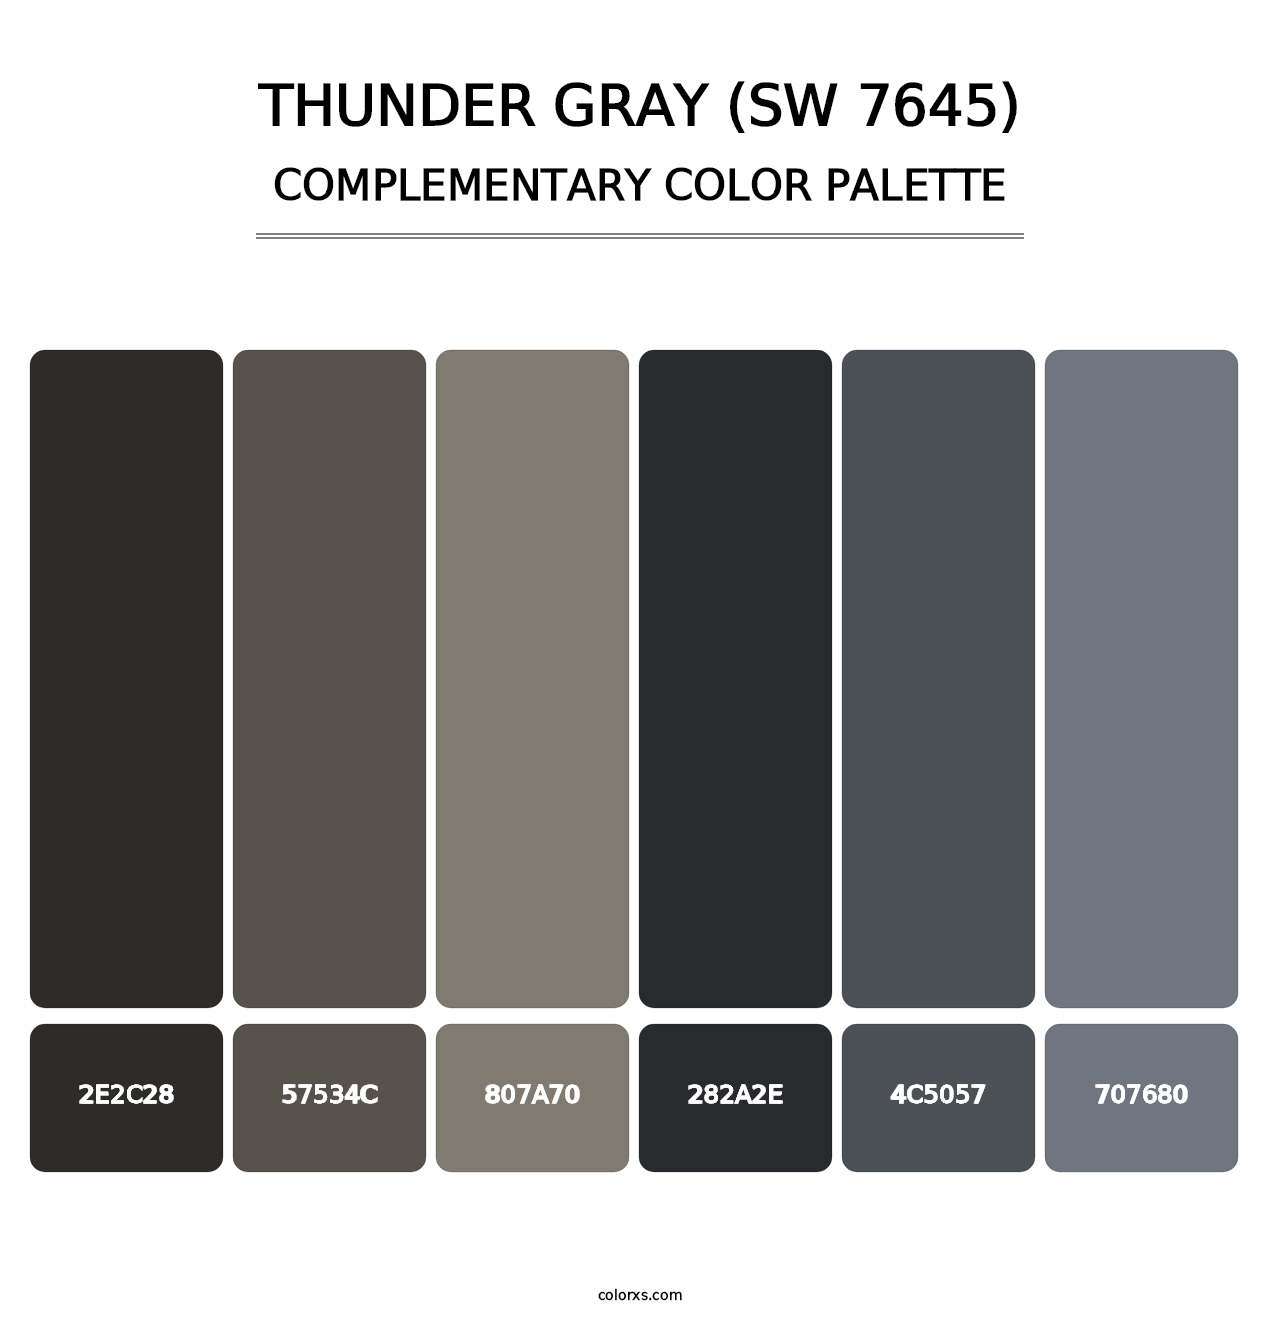 Thunder Gray (SW 7645) - Complementary Color Palette